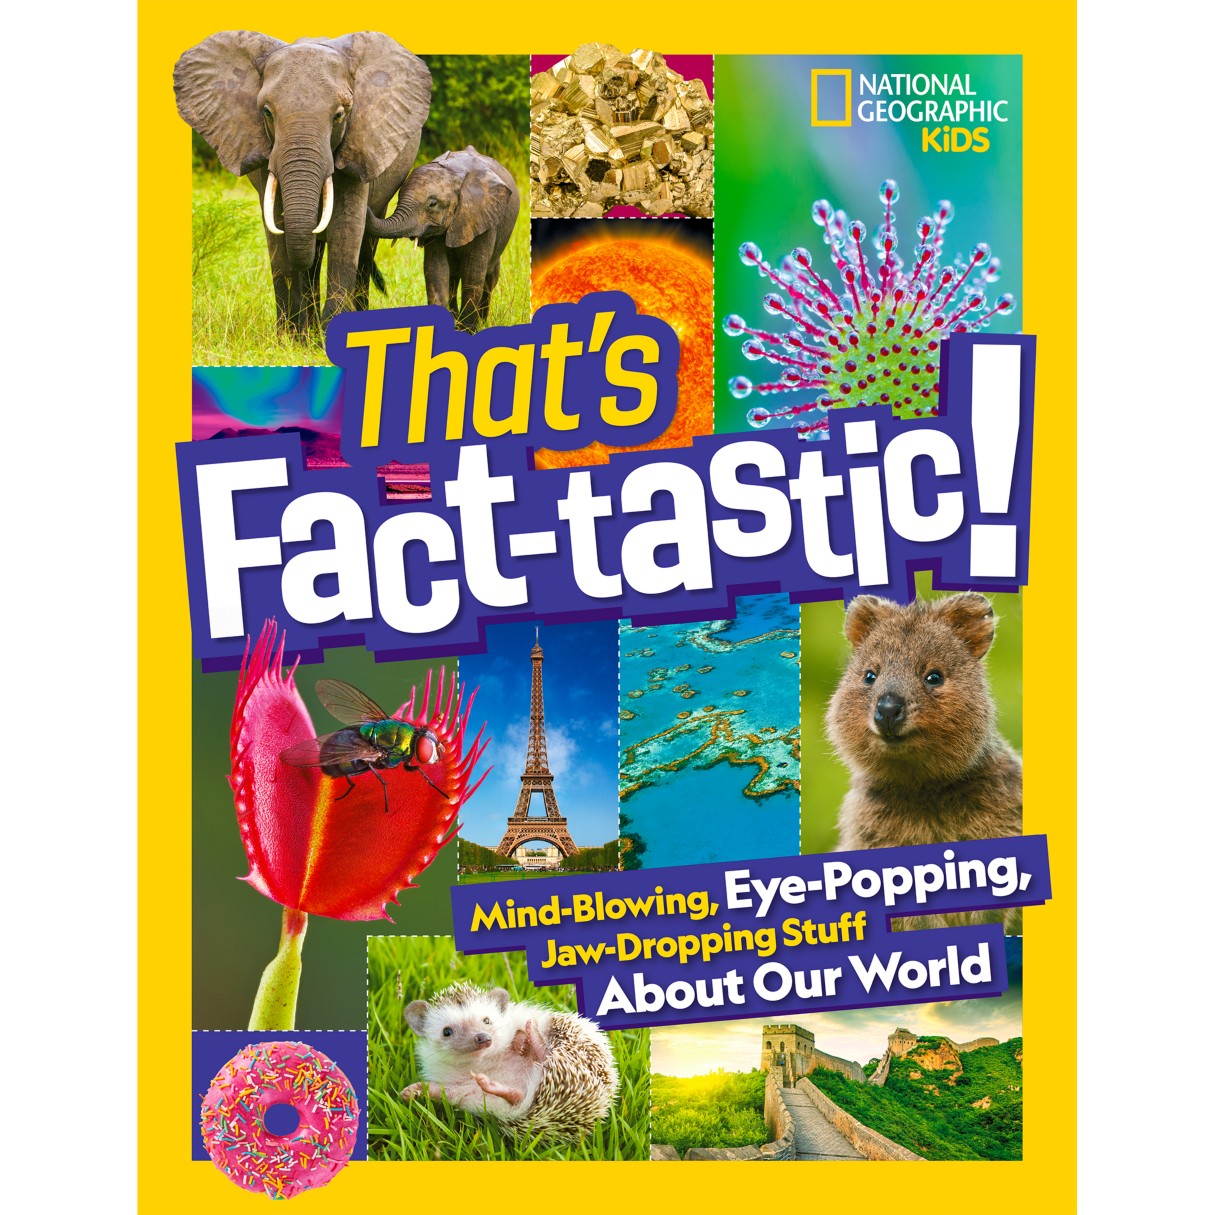 That's Fact-tastic! Book – National Geographic Kids